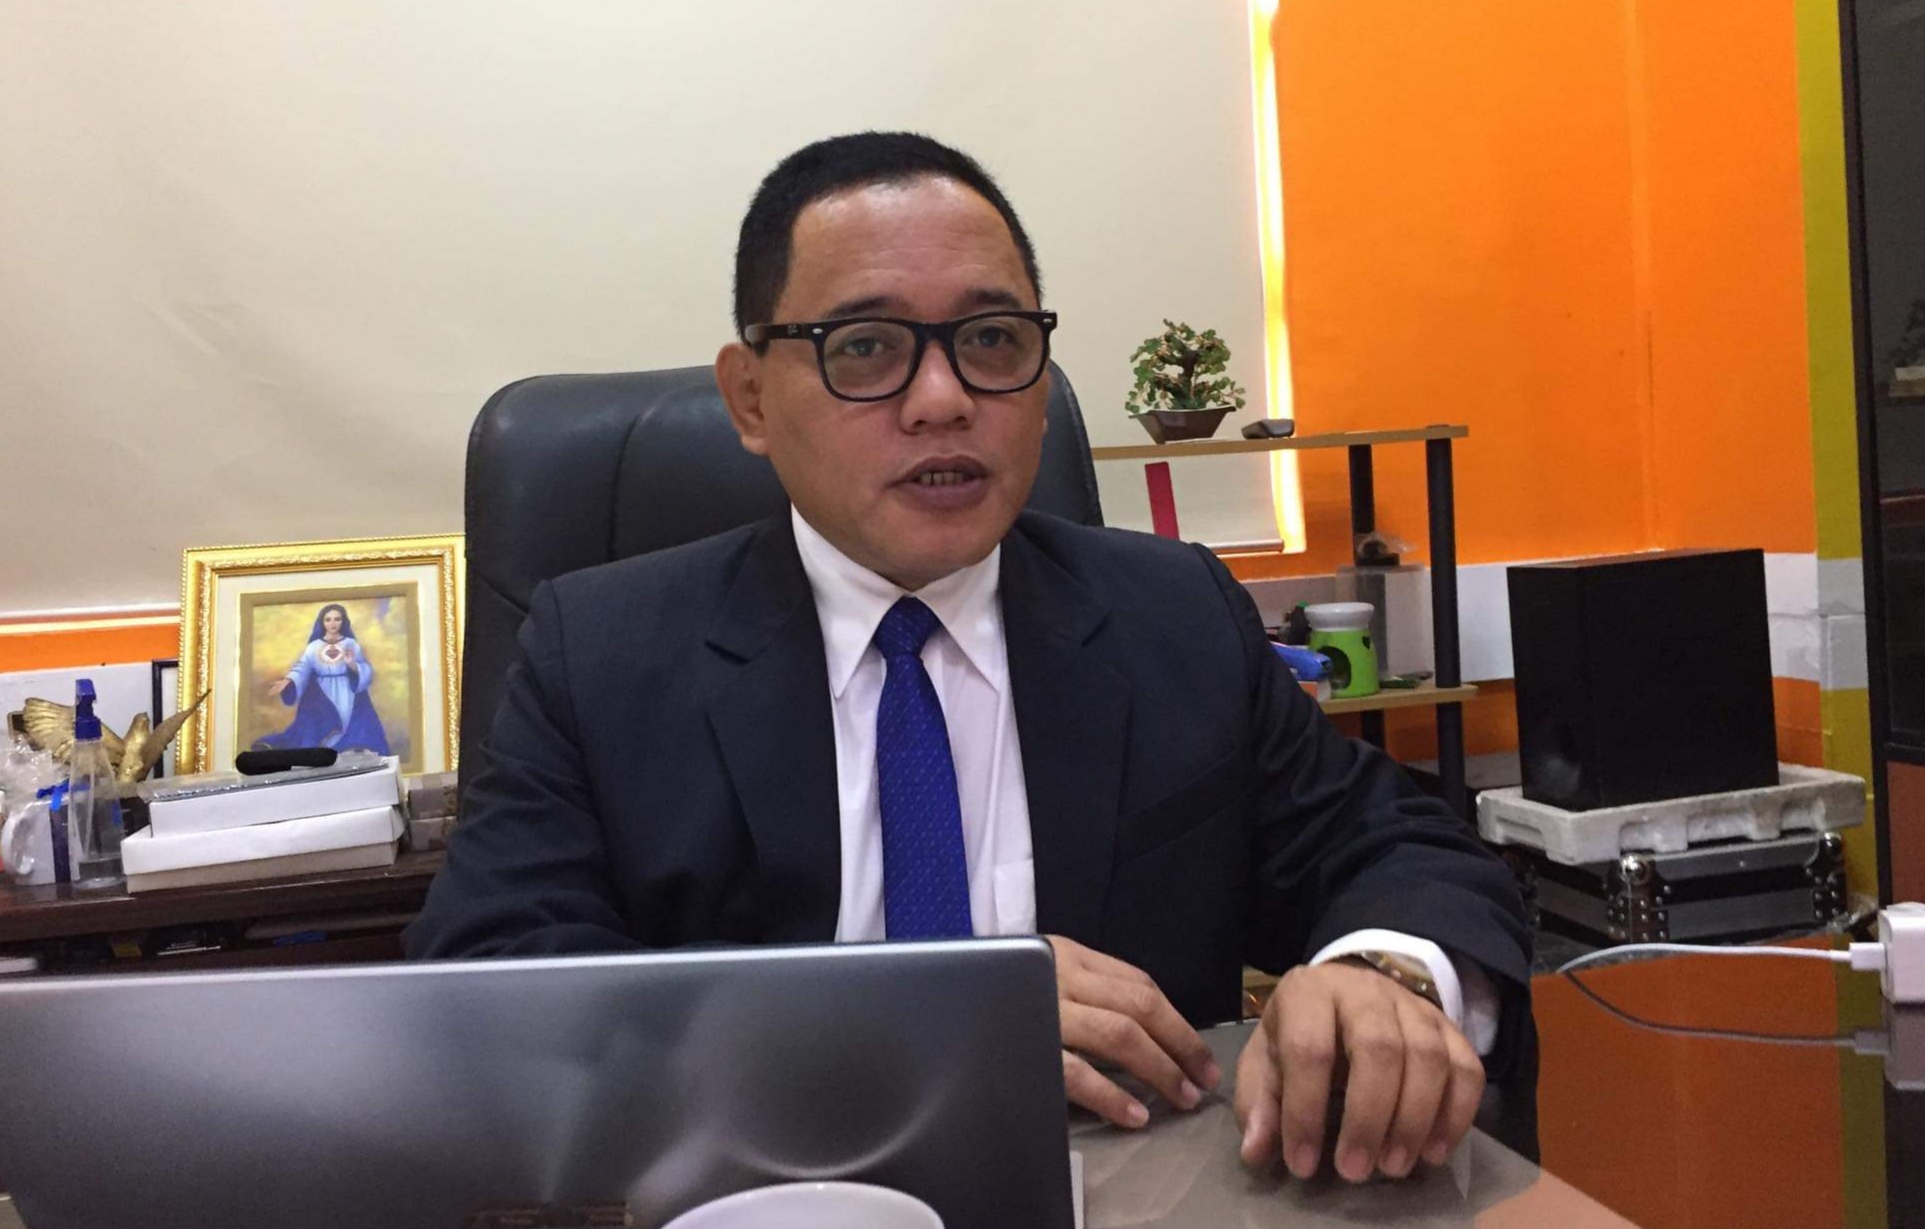 MCWD to seek water sources at properties owned by Cebu City government, Church - INQUIRER.net